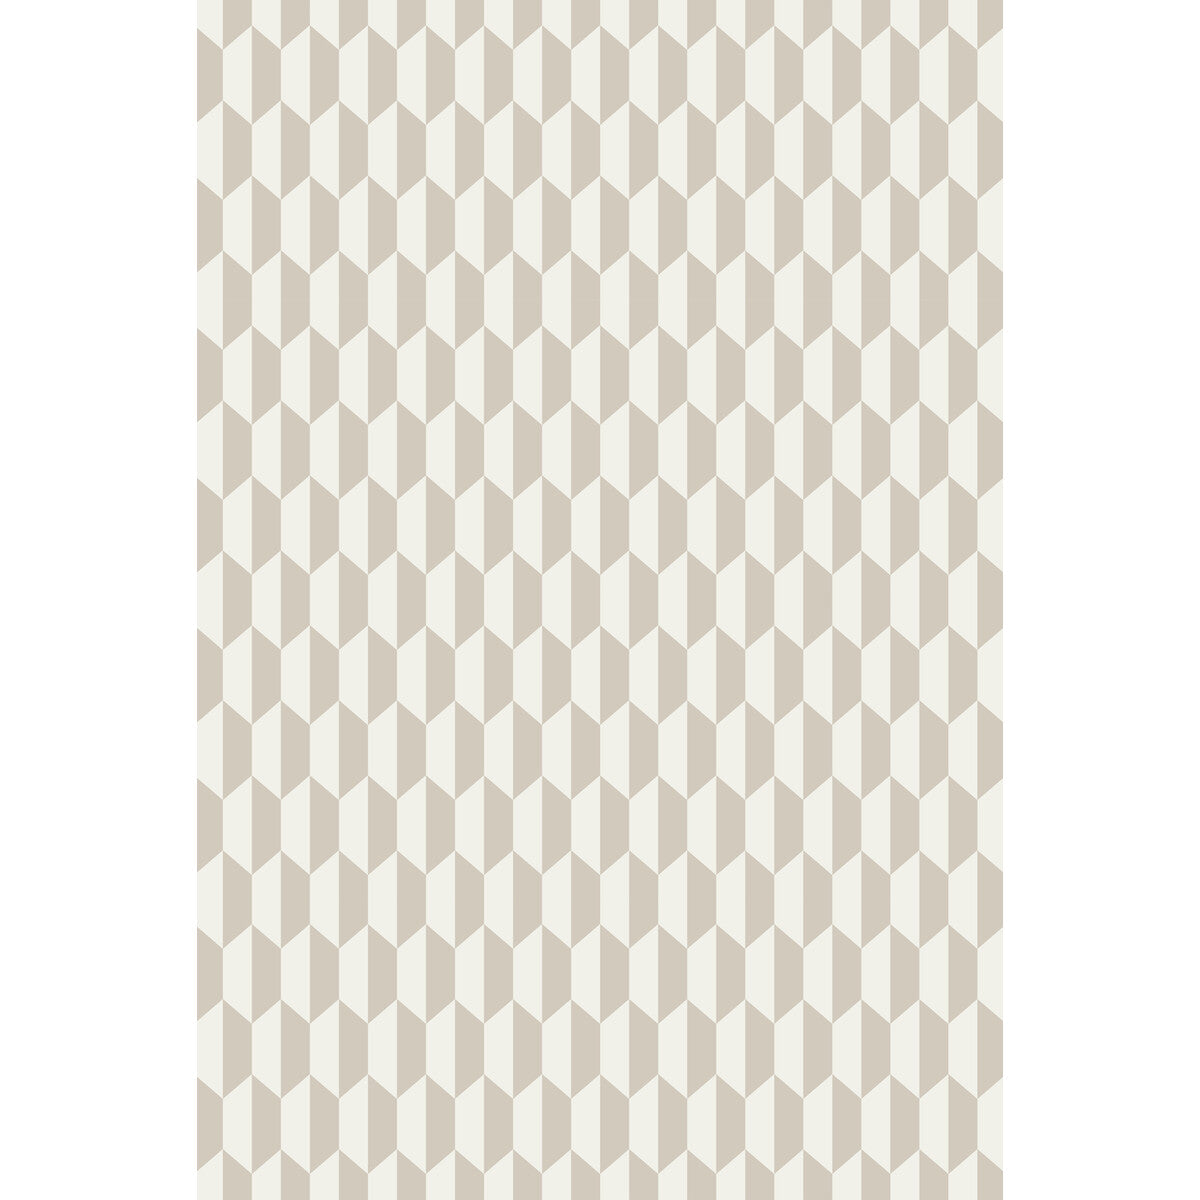 Tile fabric in cream &amp; oat color - pattern F111/9033.CS.0 - by Cole &amp; Son in the Cole &amp; Son Contemporary Fabrics collection